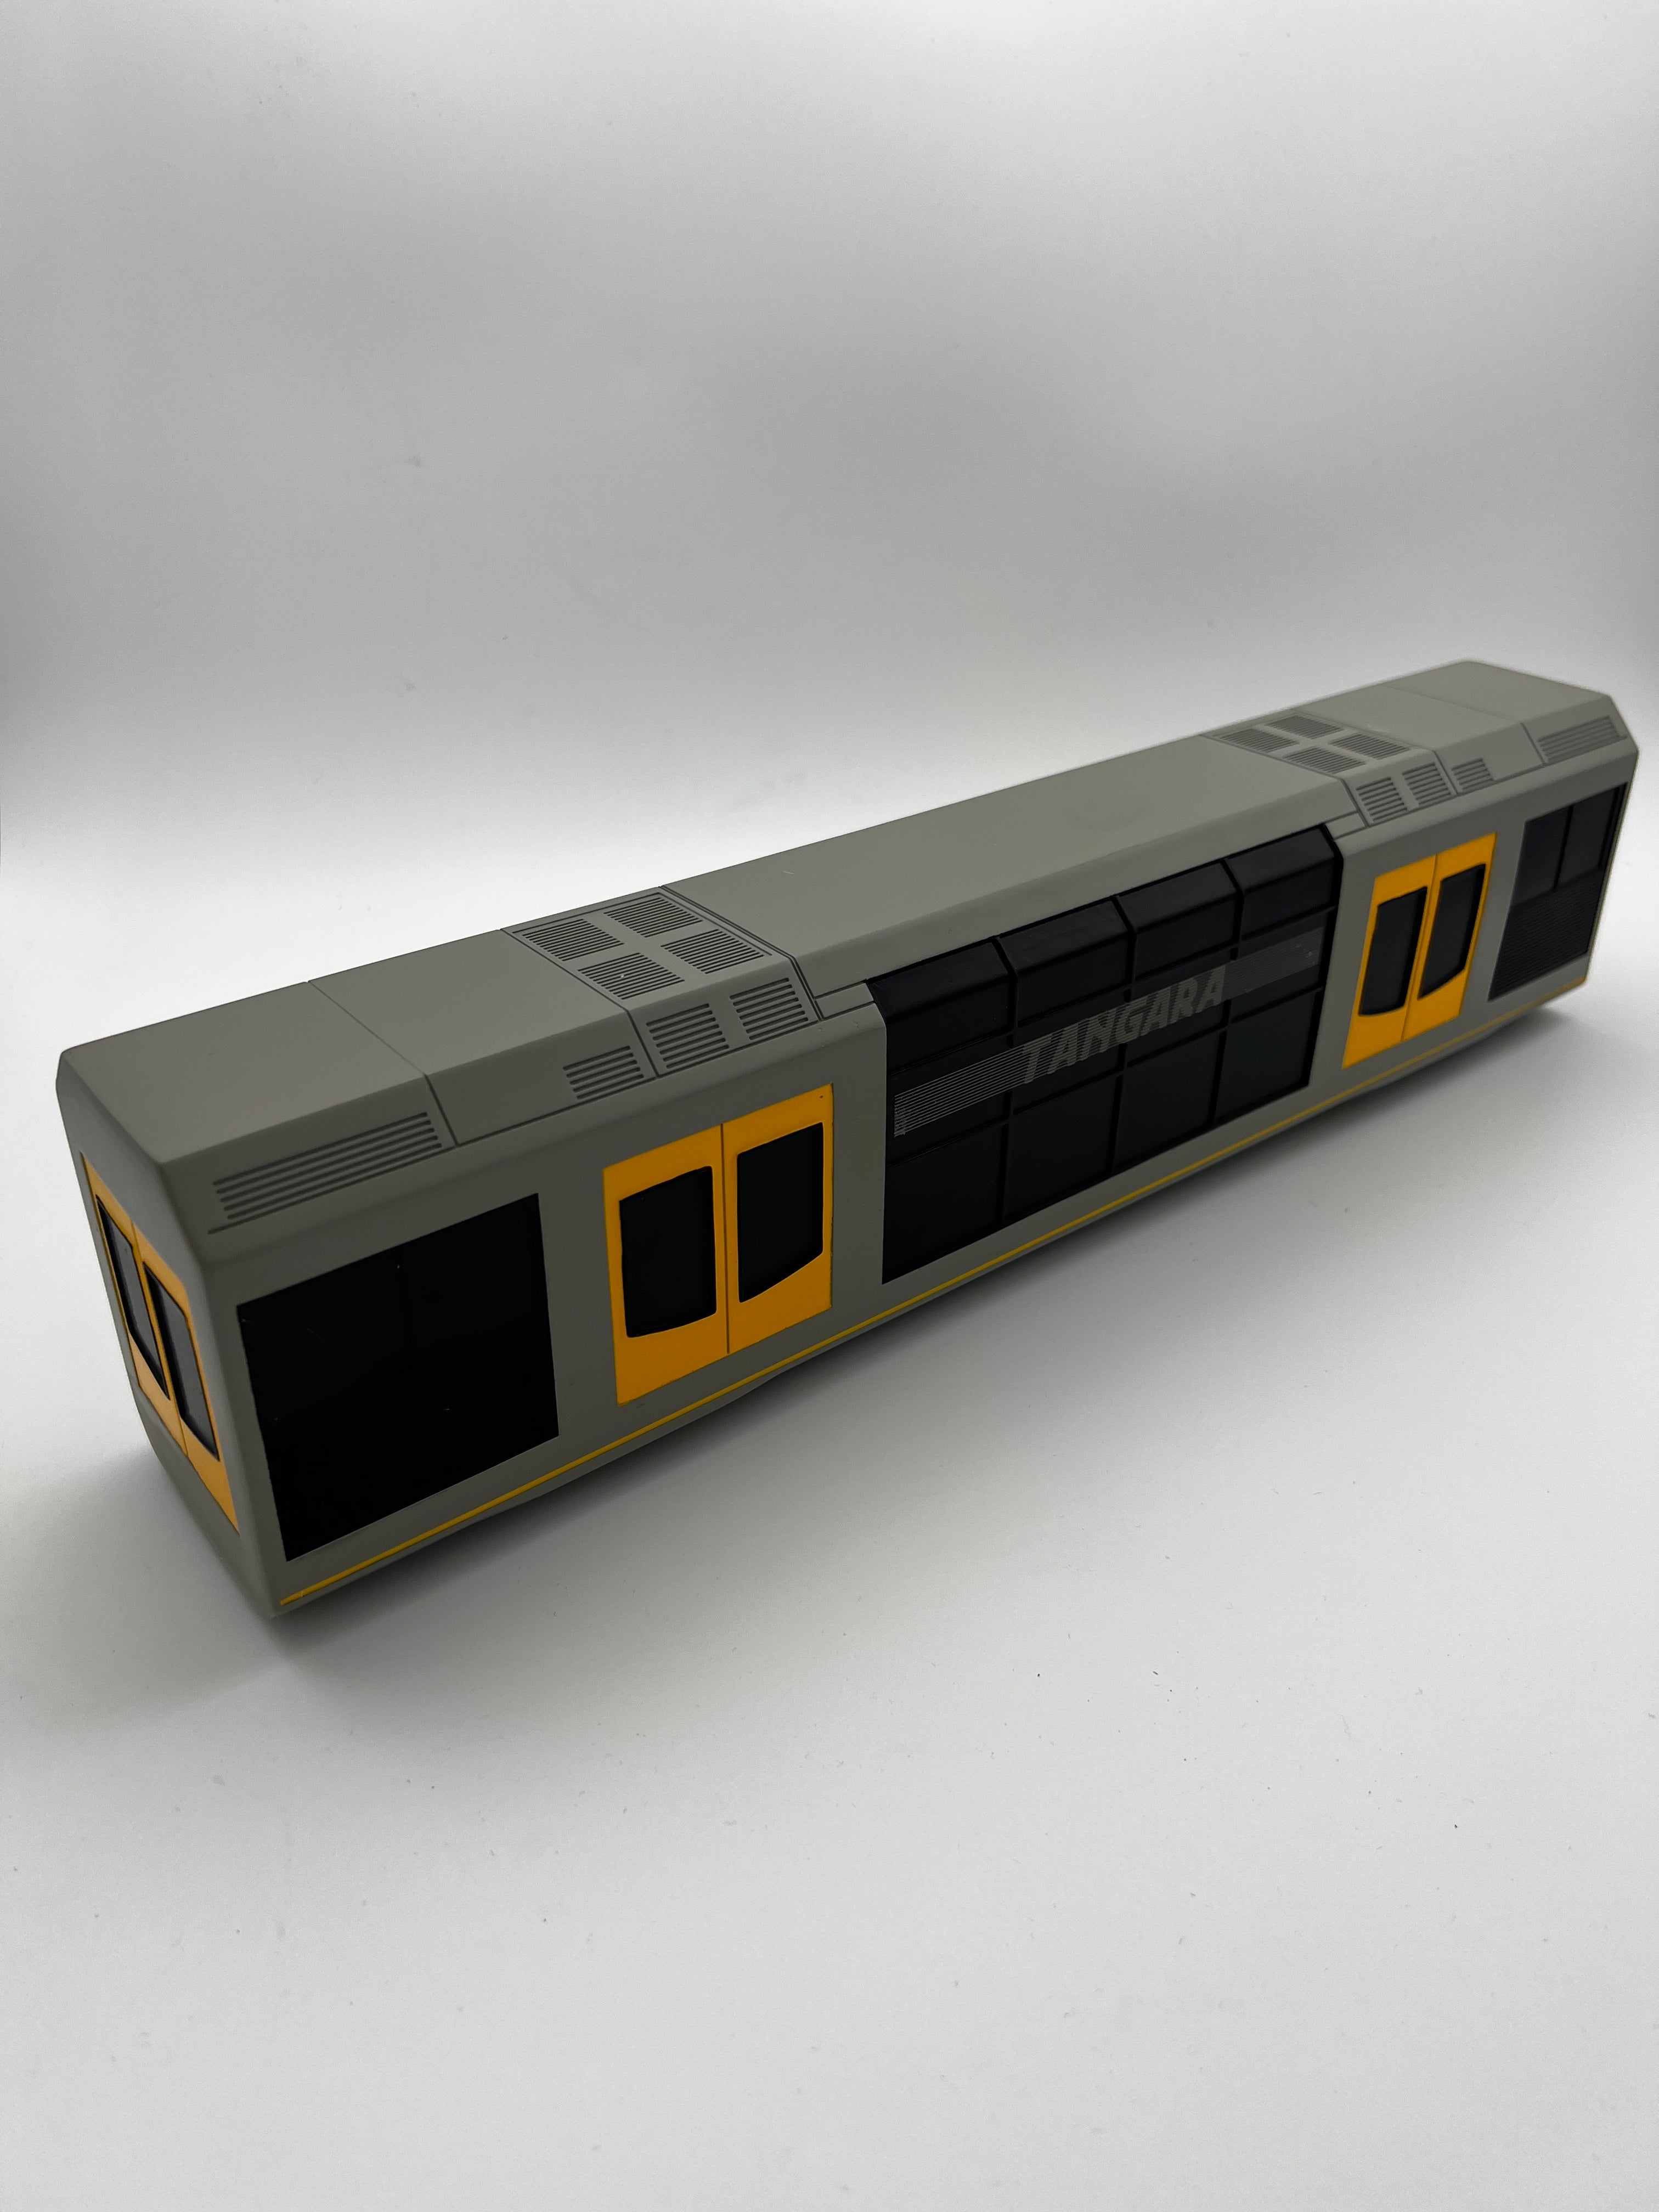 Redhot Trains Train Model Tangara Middle Carriage